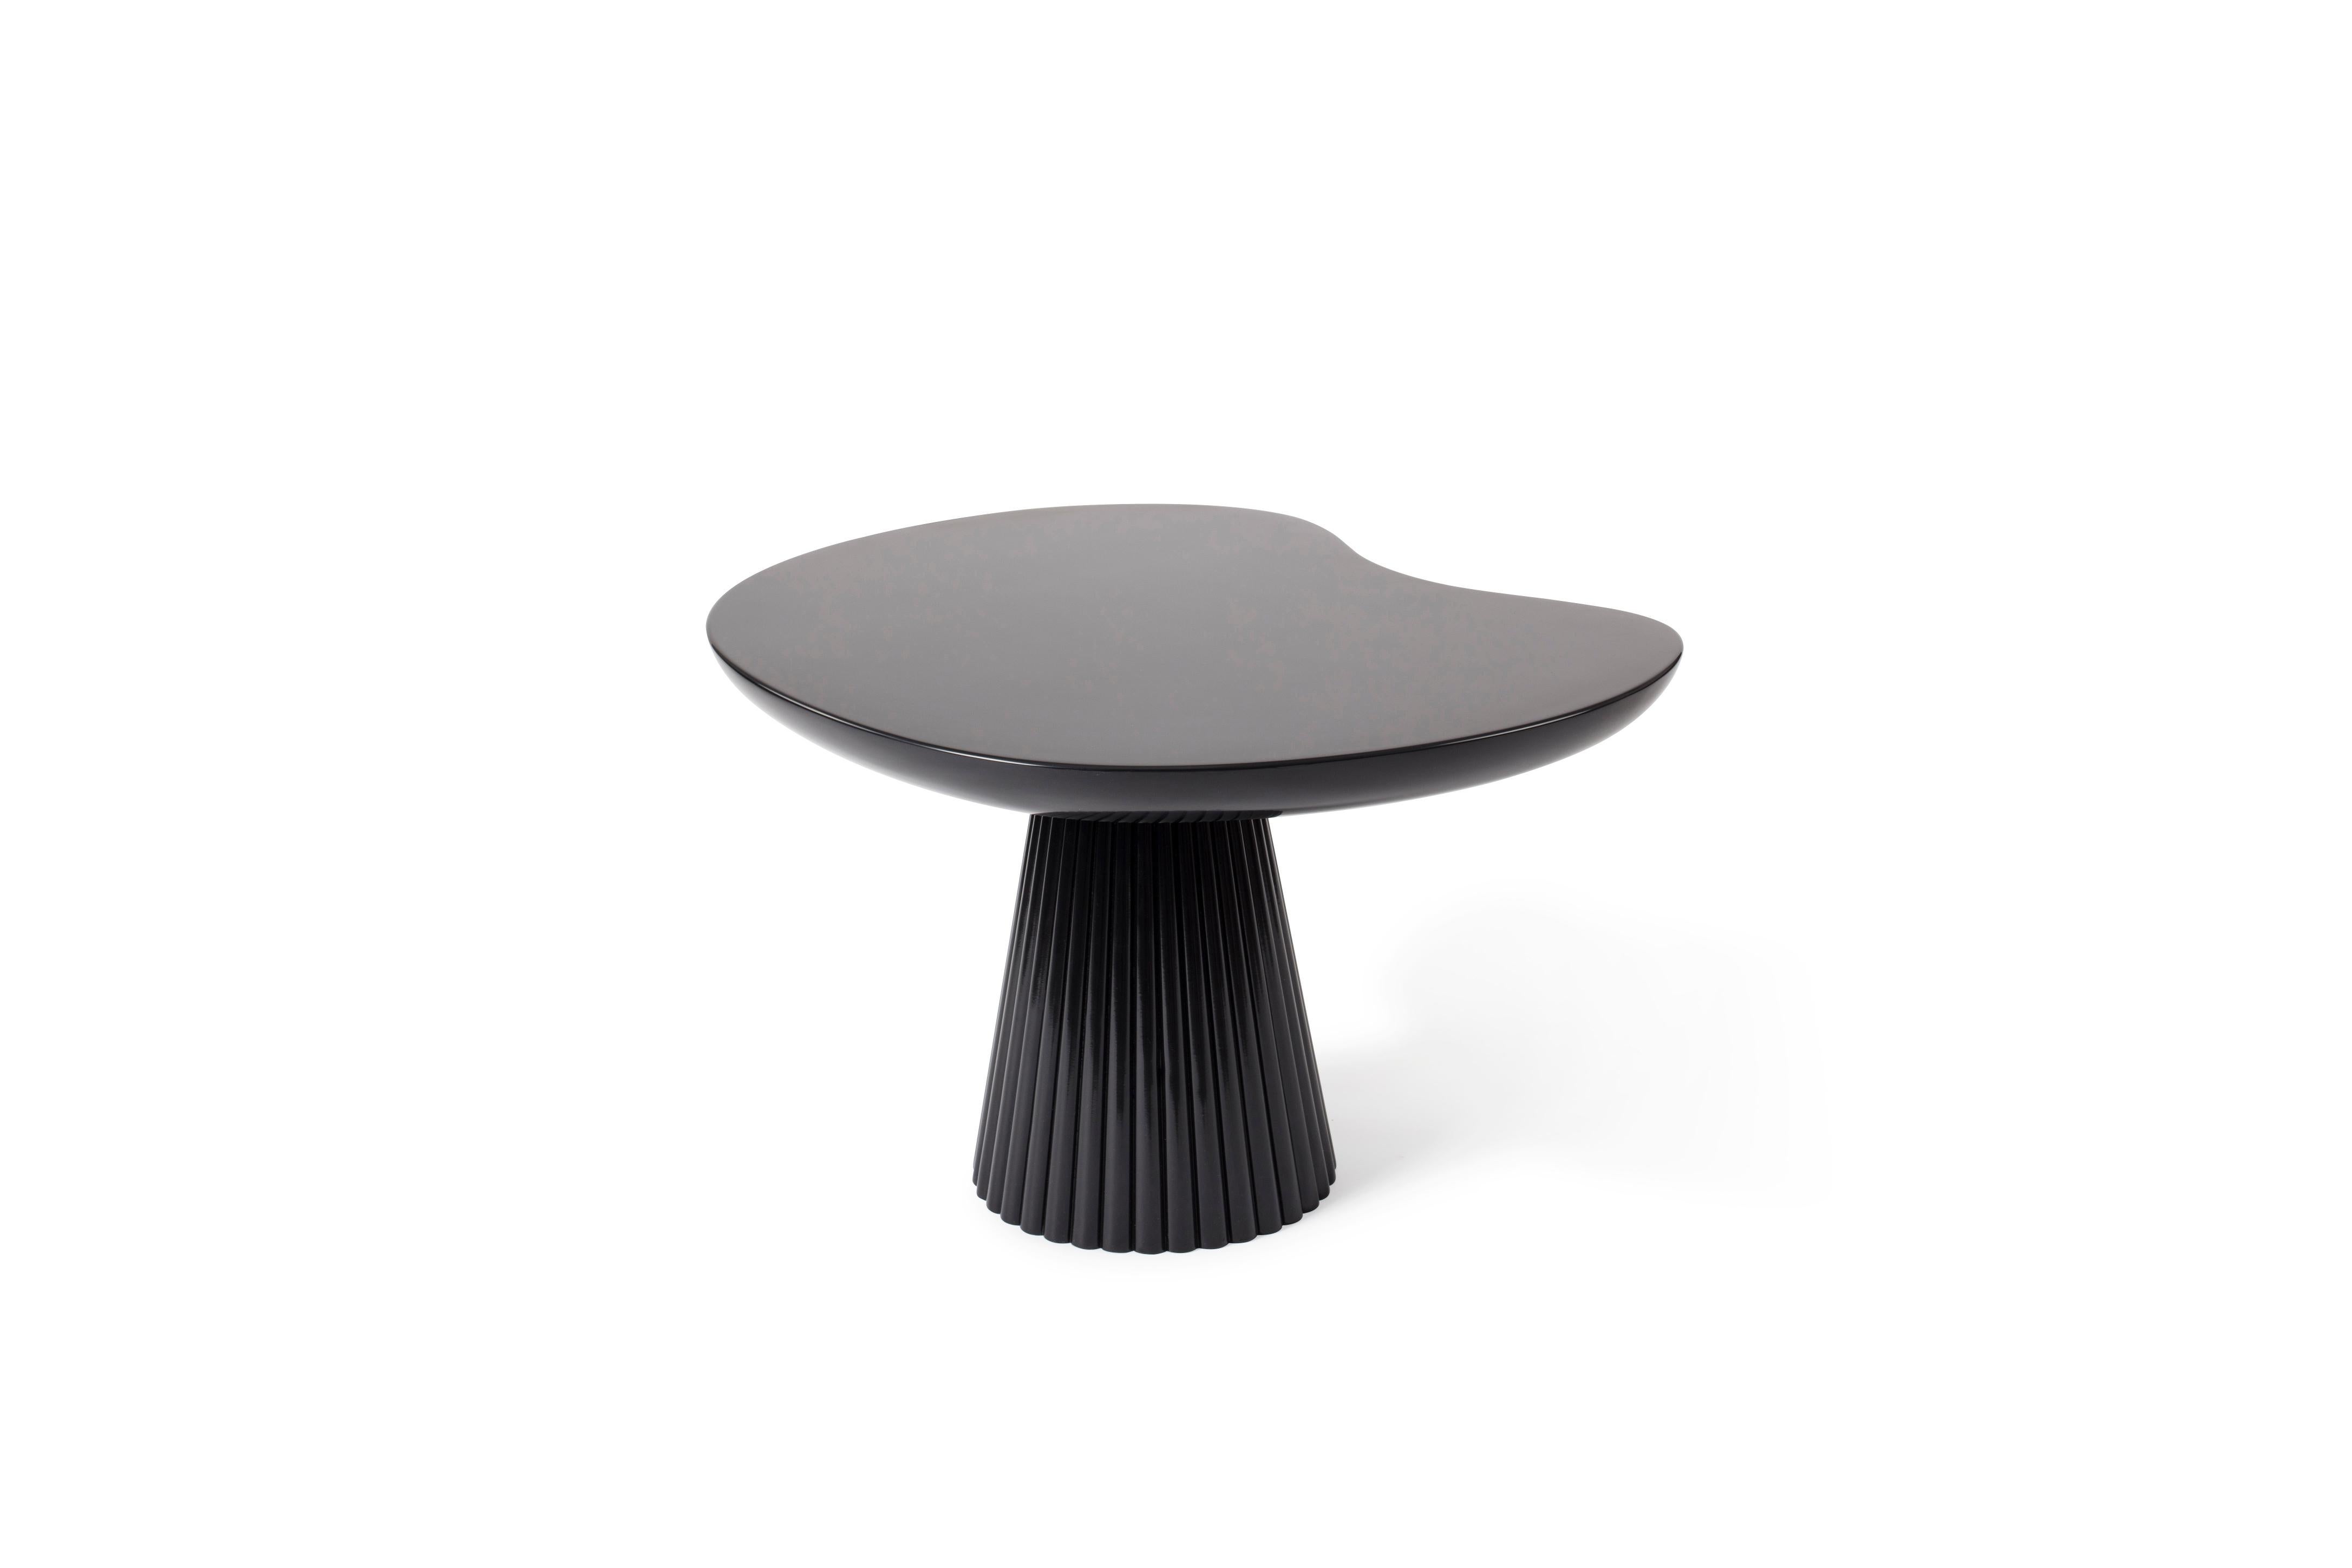 French Homage to Miro Table by Thomas Dariel